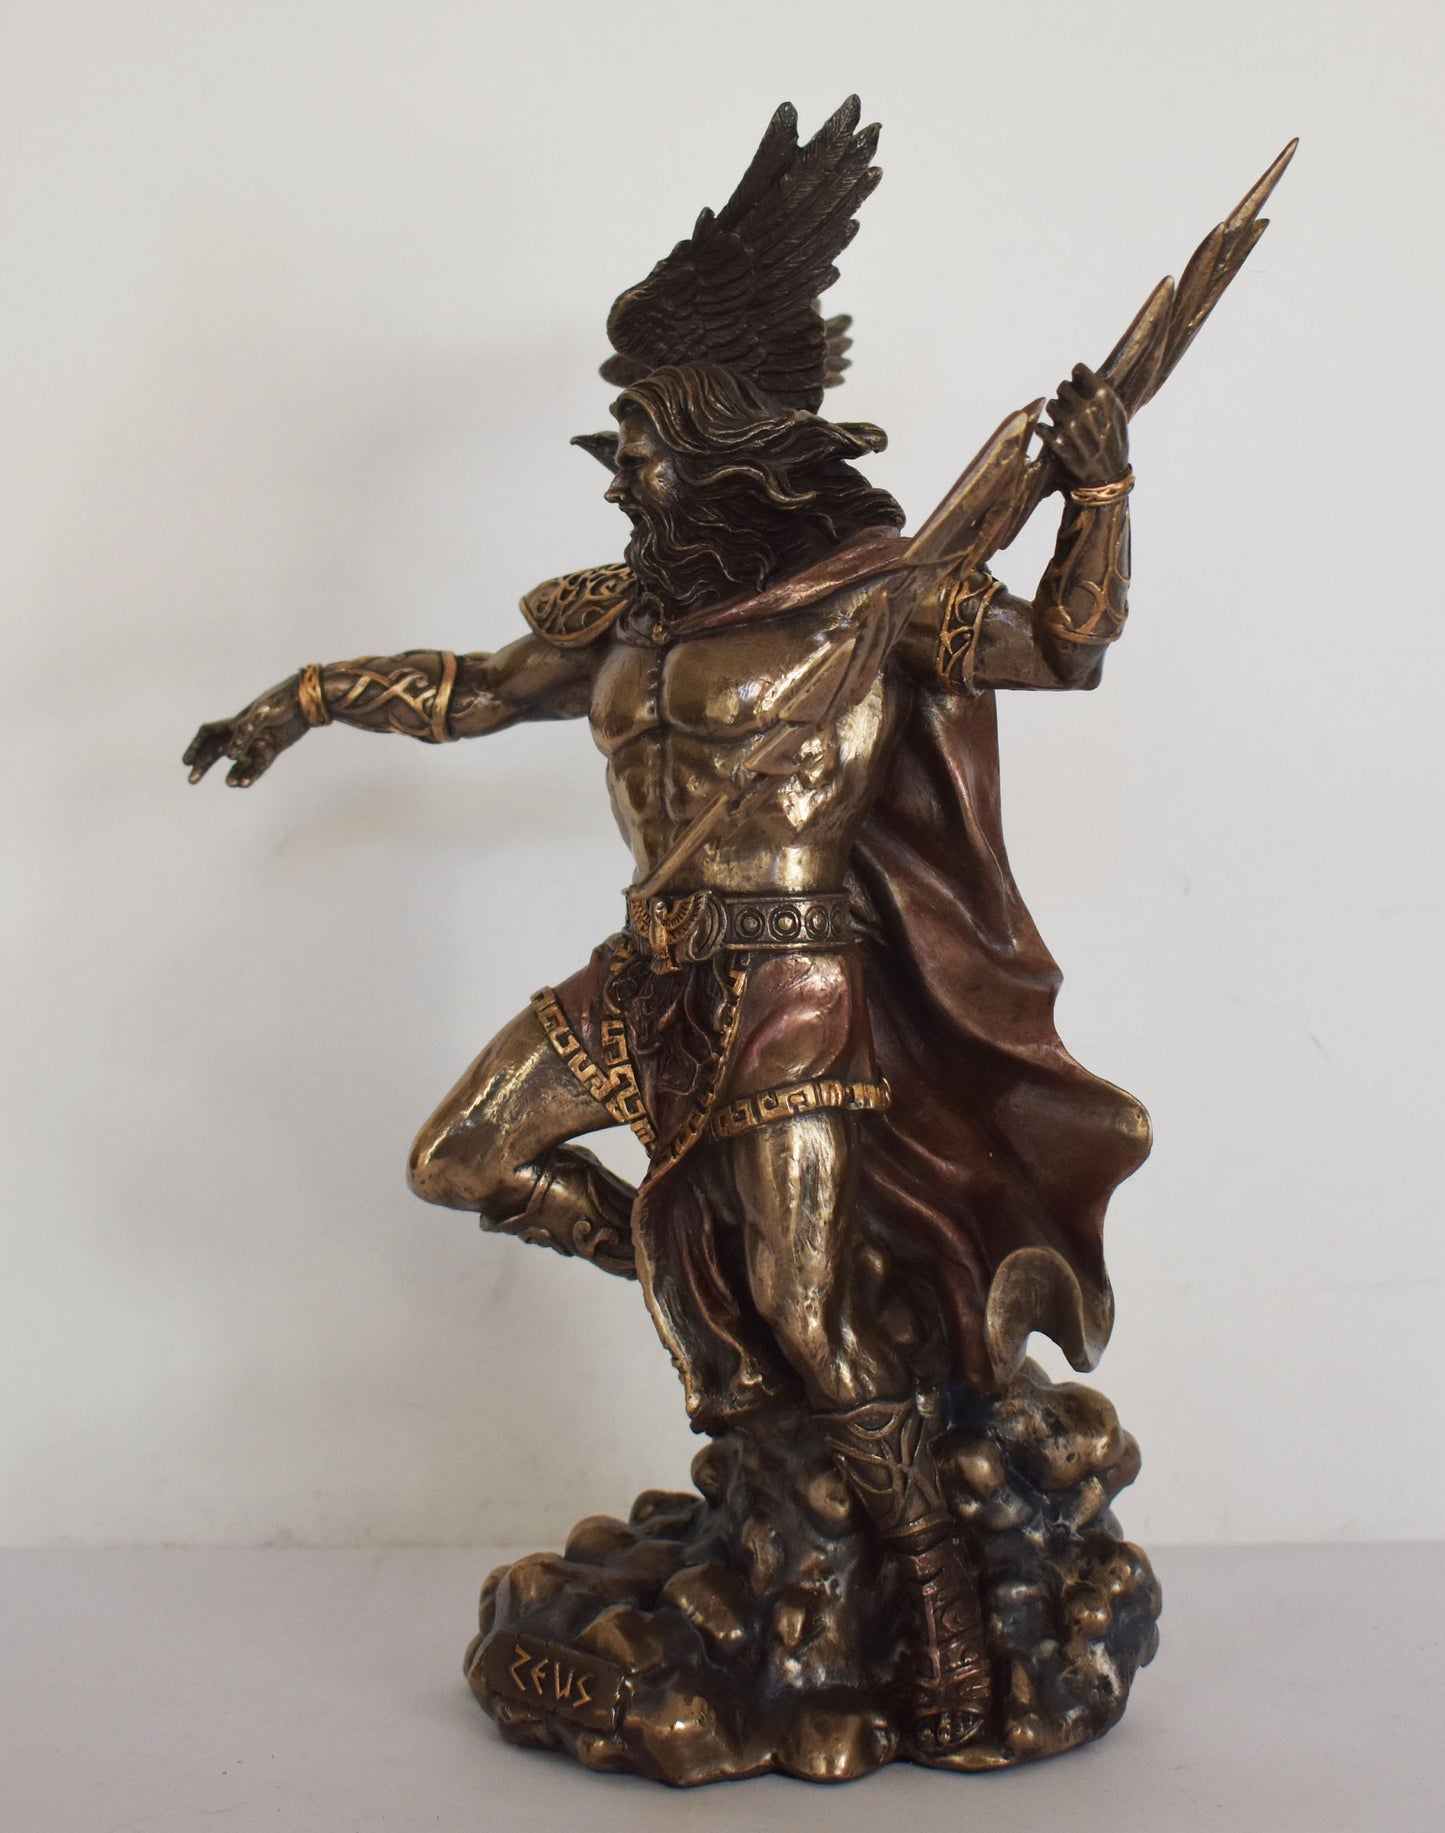 Zeus Jupiter - Greek Roman God of the Sky, Law and Order, Destiny and Fate - King of the Gods of Mount Olympus - Cold Cast Bronze Resin